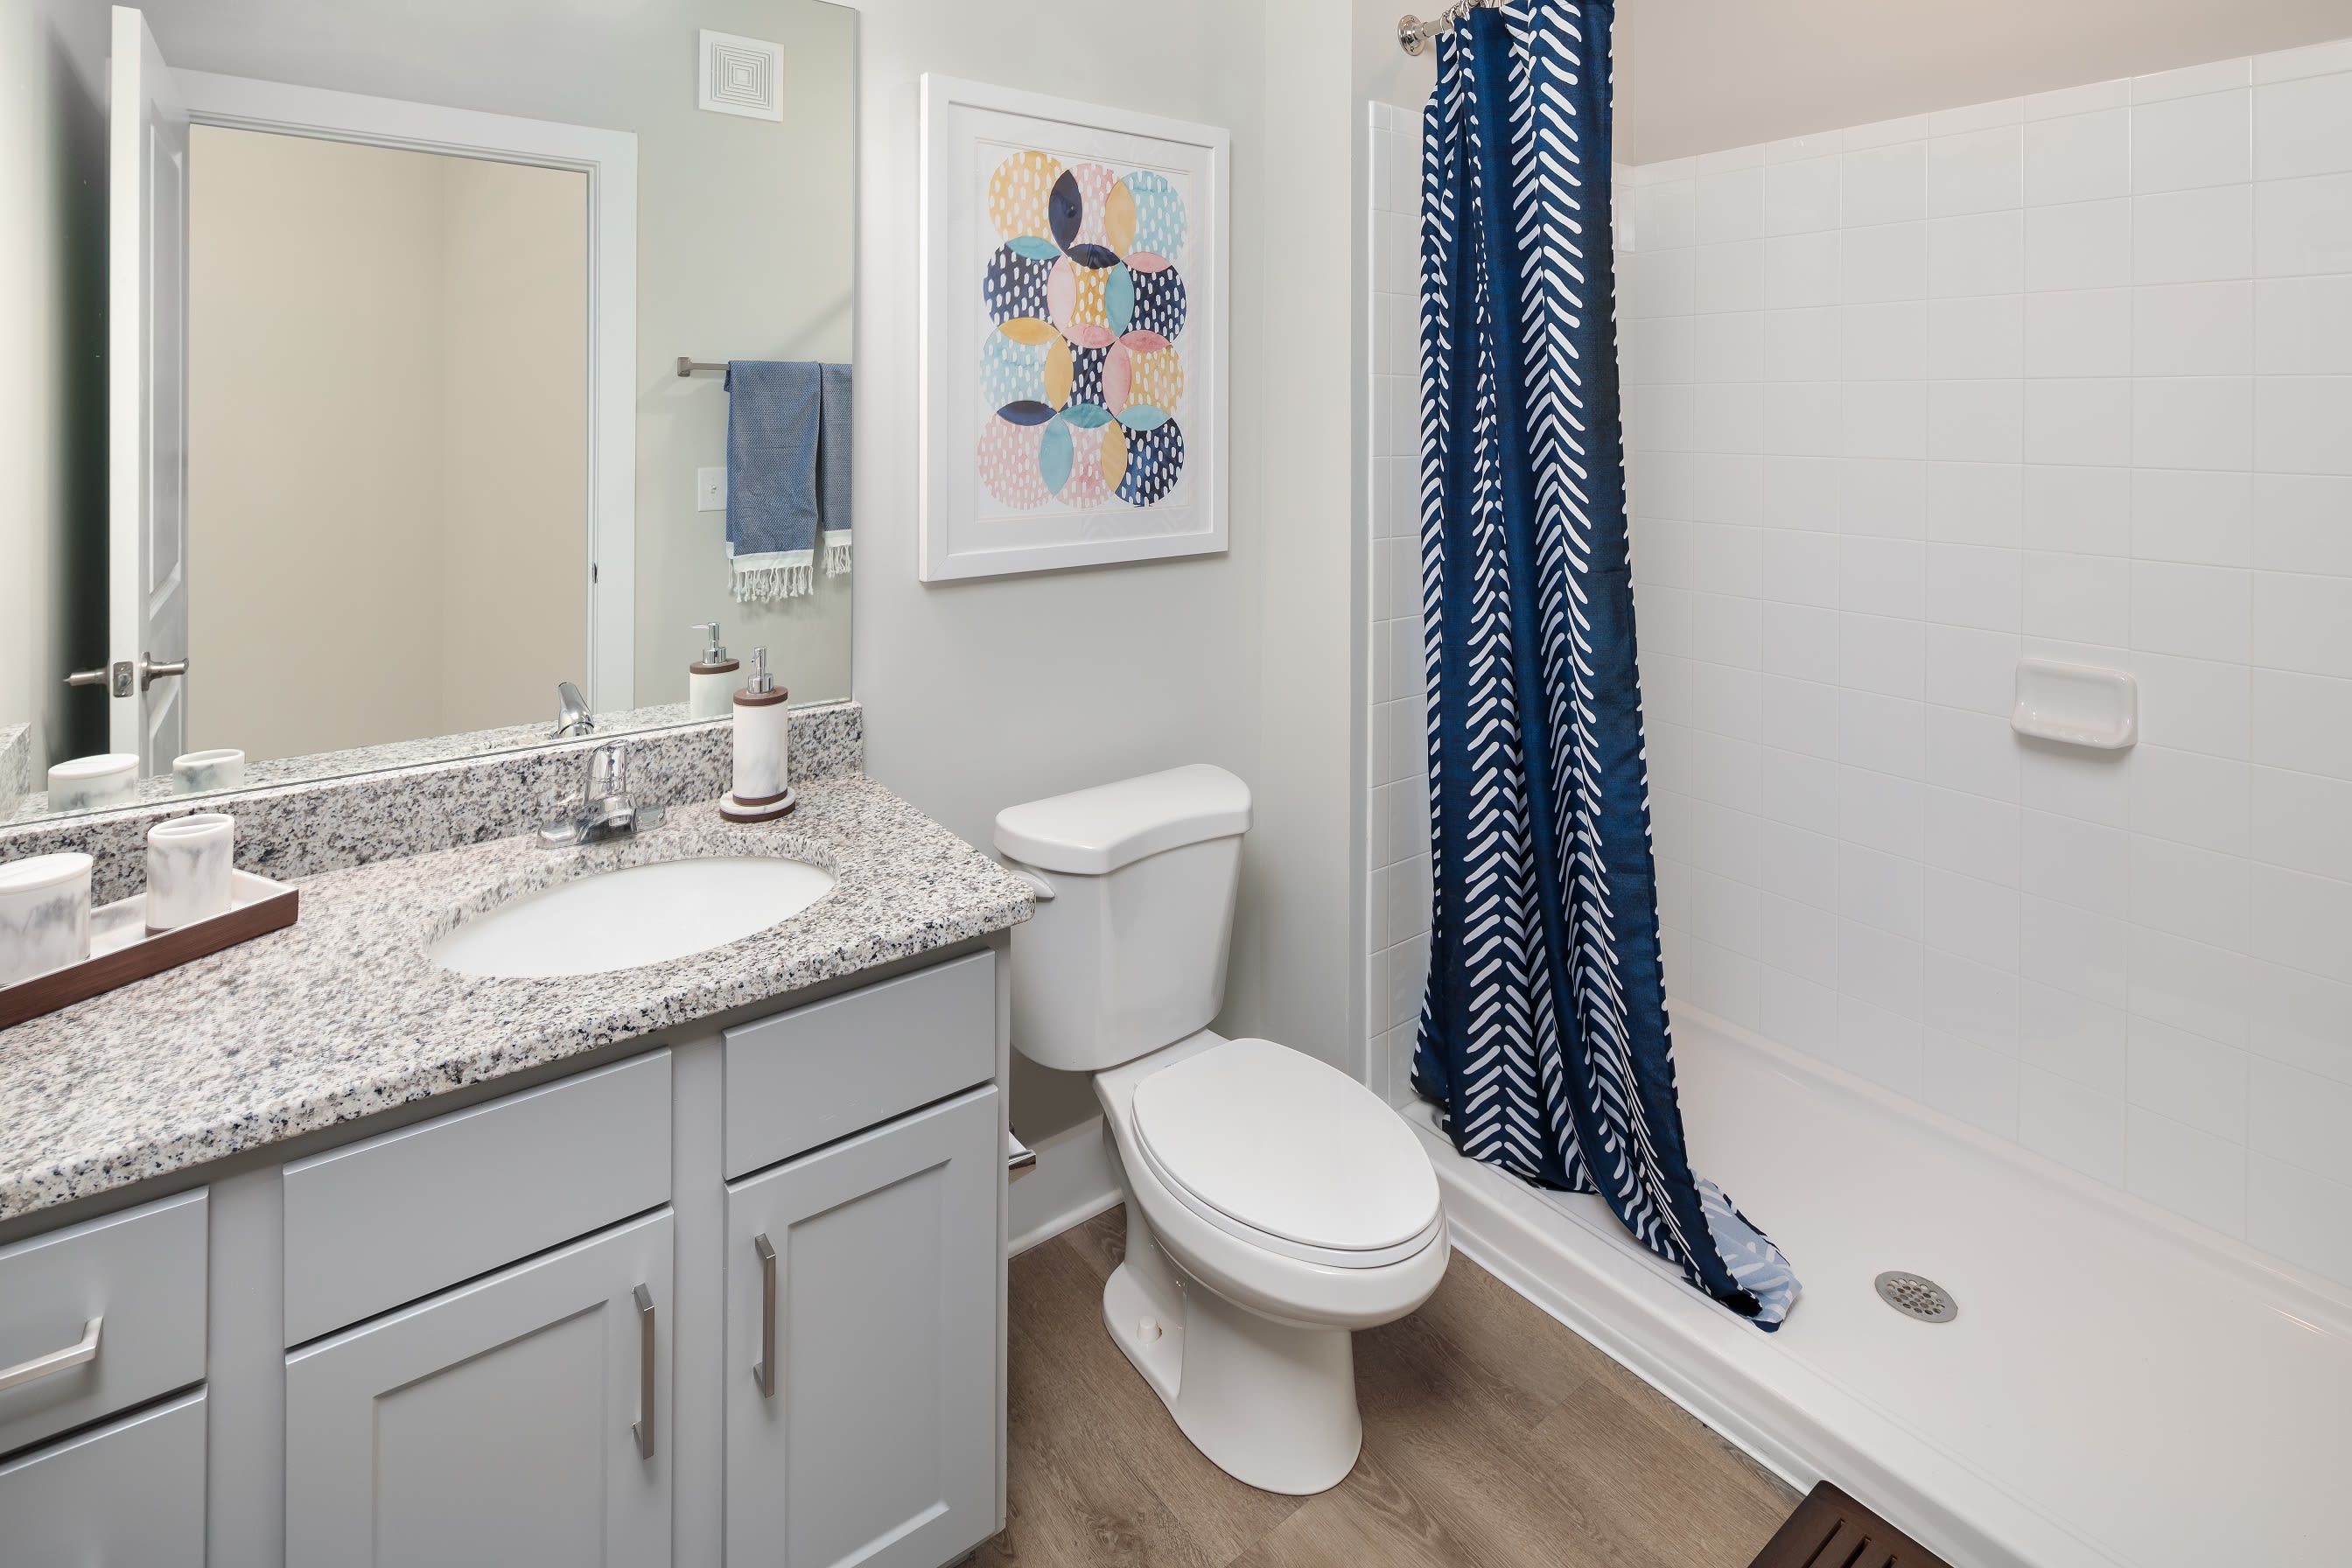 Roomy bathroom with lots of storage space under the large vanity at The Mason in Ladson, South Carolina